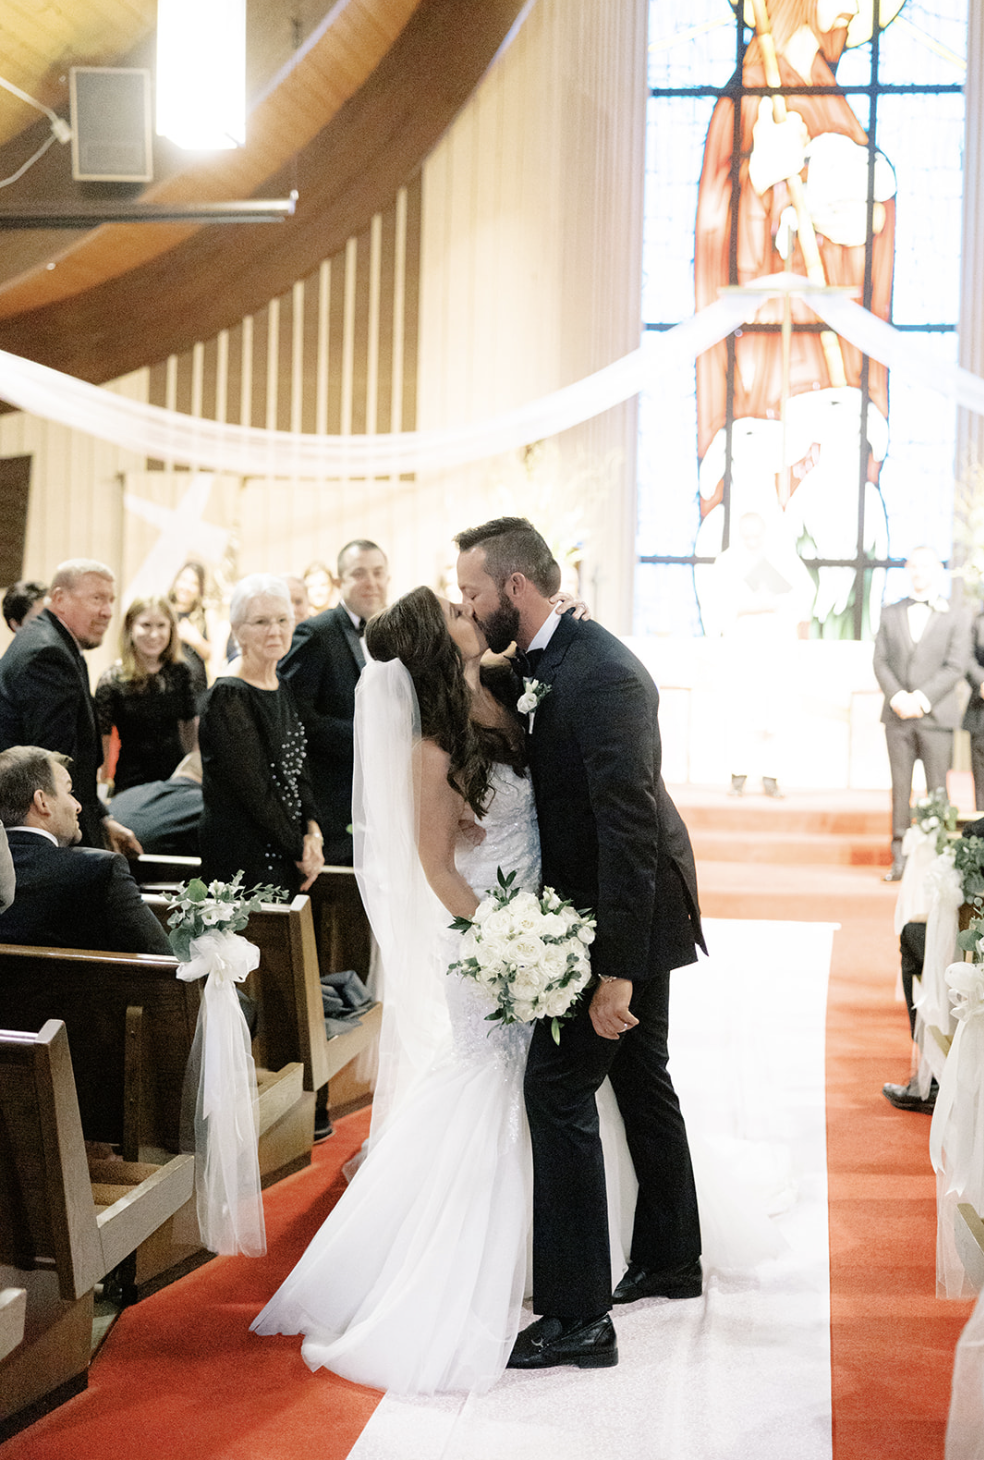 Chicago bride and groom stop midway down aisle after exchanging vows to kiss in Chicago wedding.